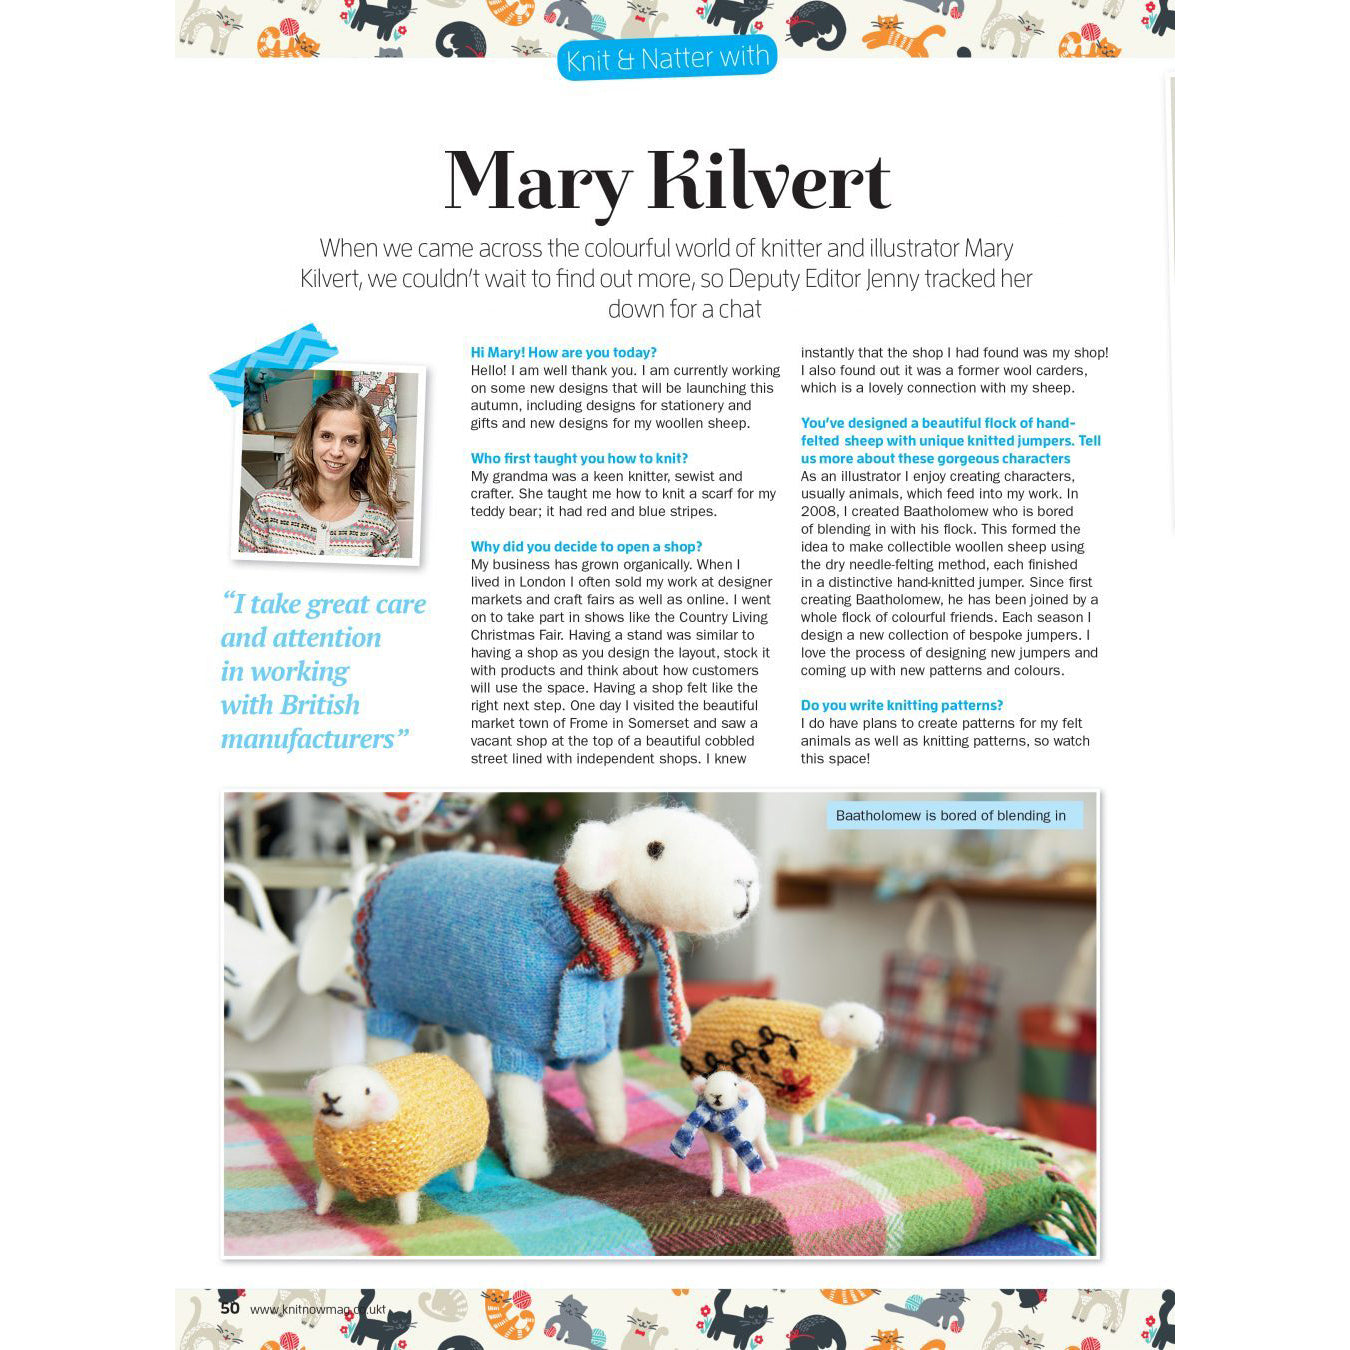 Knit Now magazine 'Knit & Natter with Mary Kilvert' article